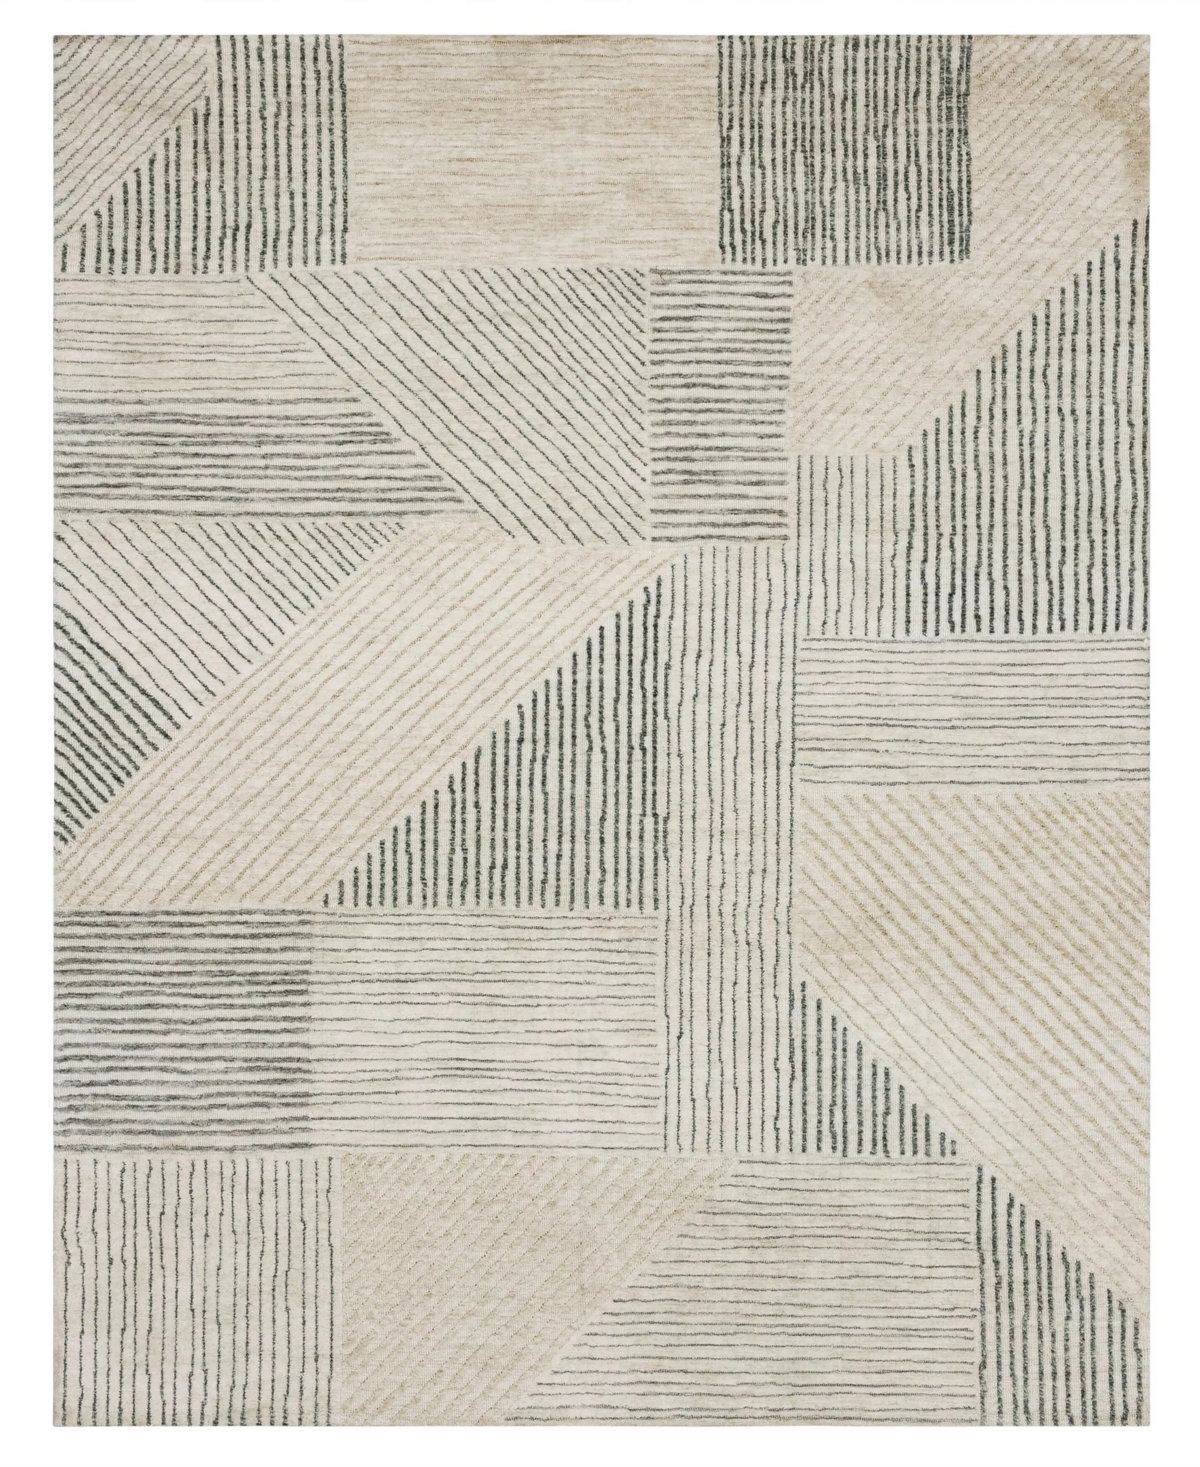 Drew & Jonathan Home Bowen Central Valley 5'3" X 7'10" Area Rug In Tan